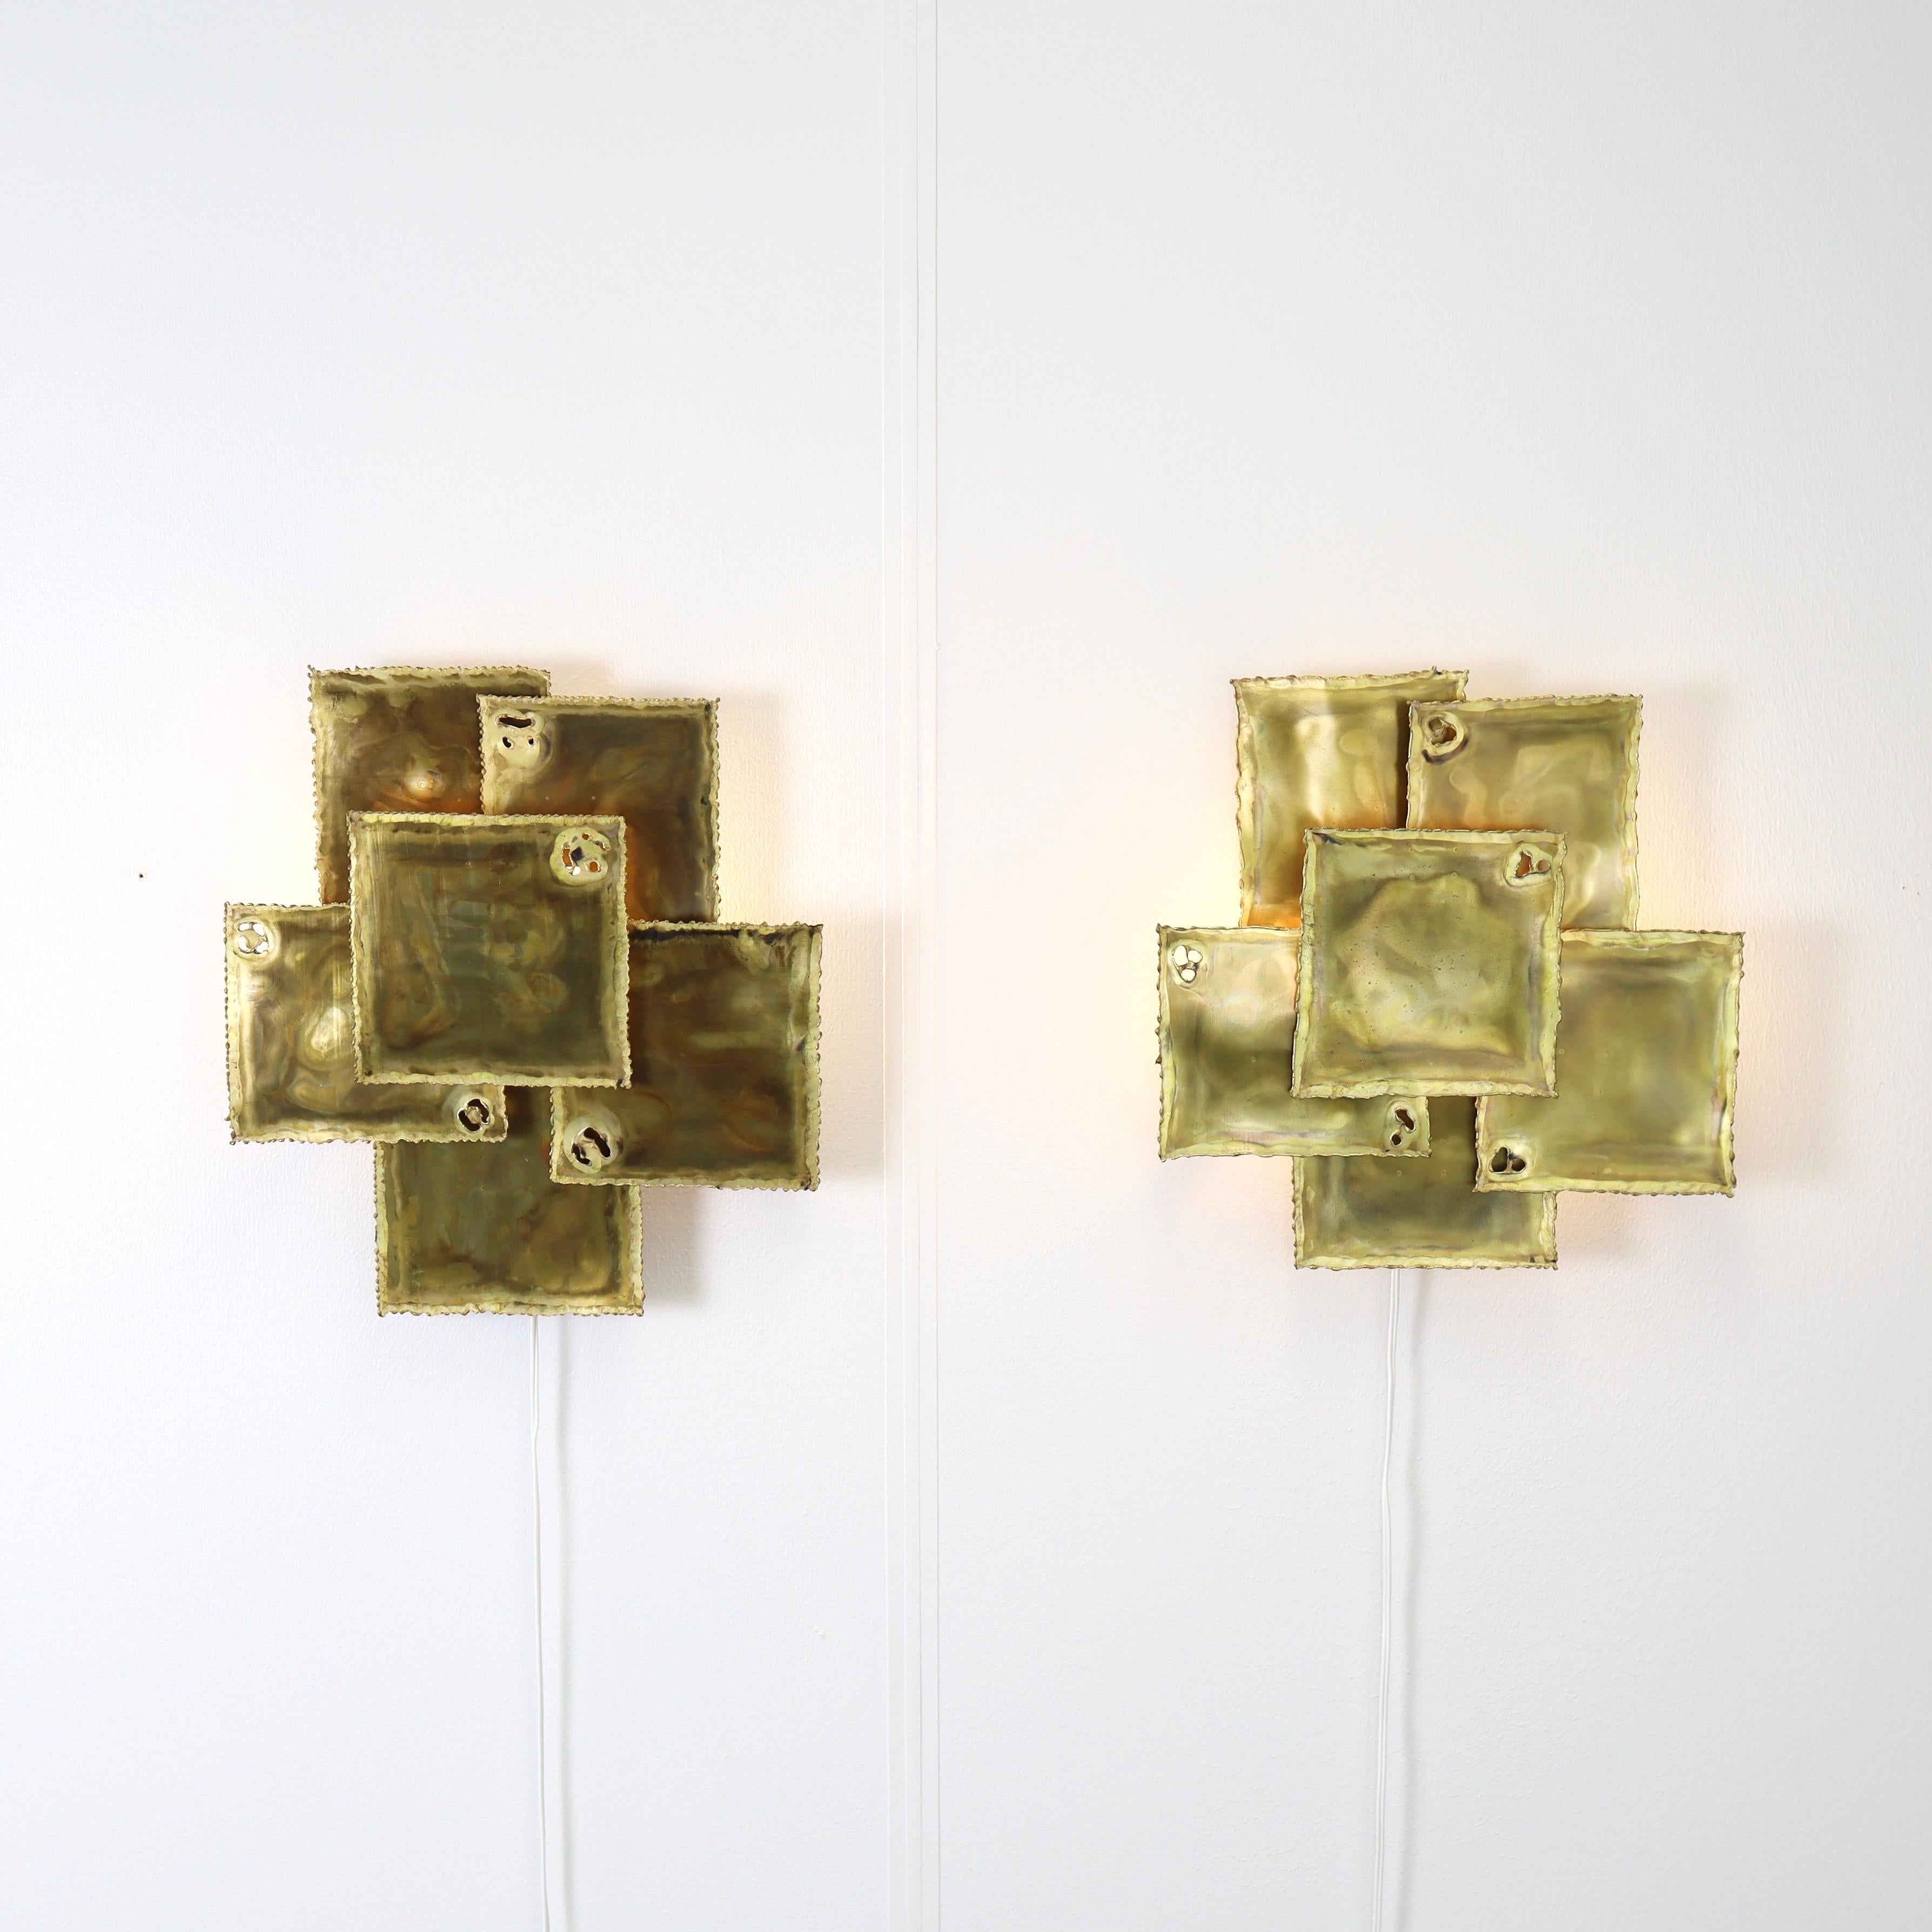 Brutalist Pair of Large Brass Wall Lamps by Svend Aage Holm Sorensen, 1960s, Denmark For Sale